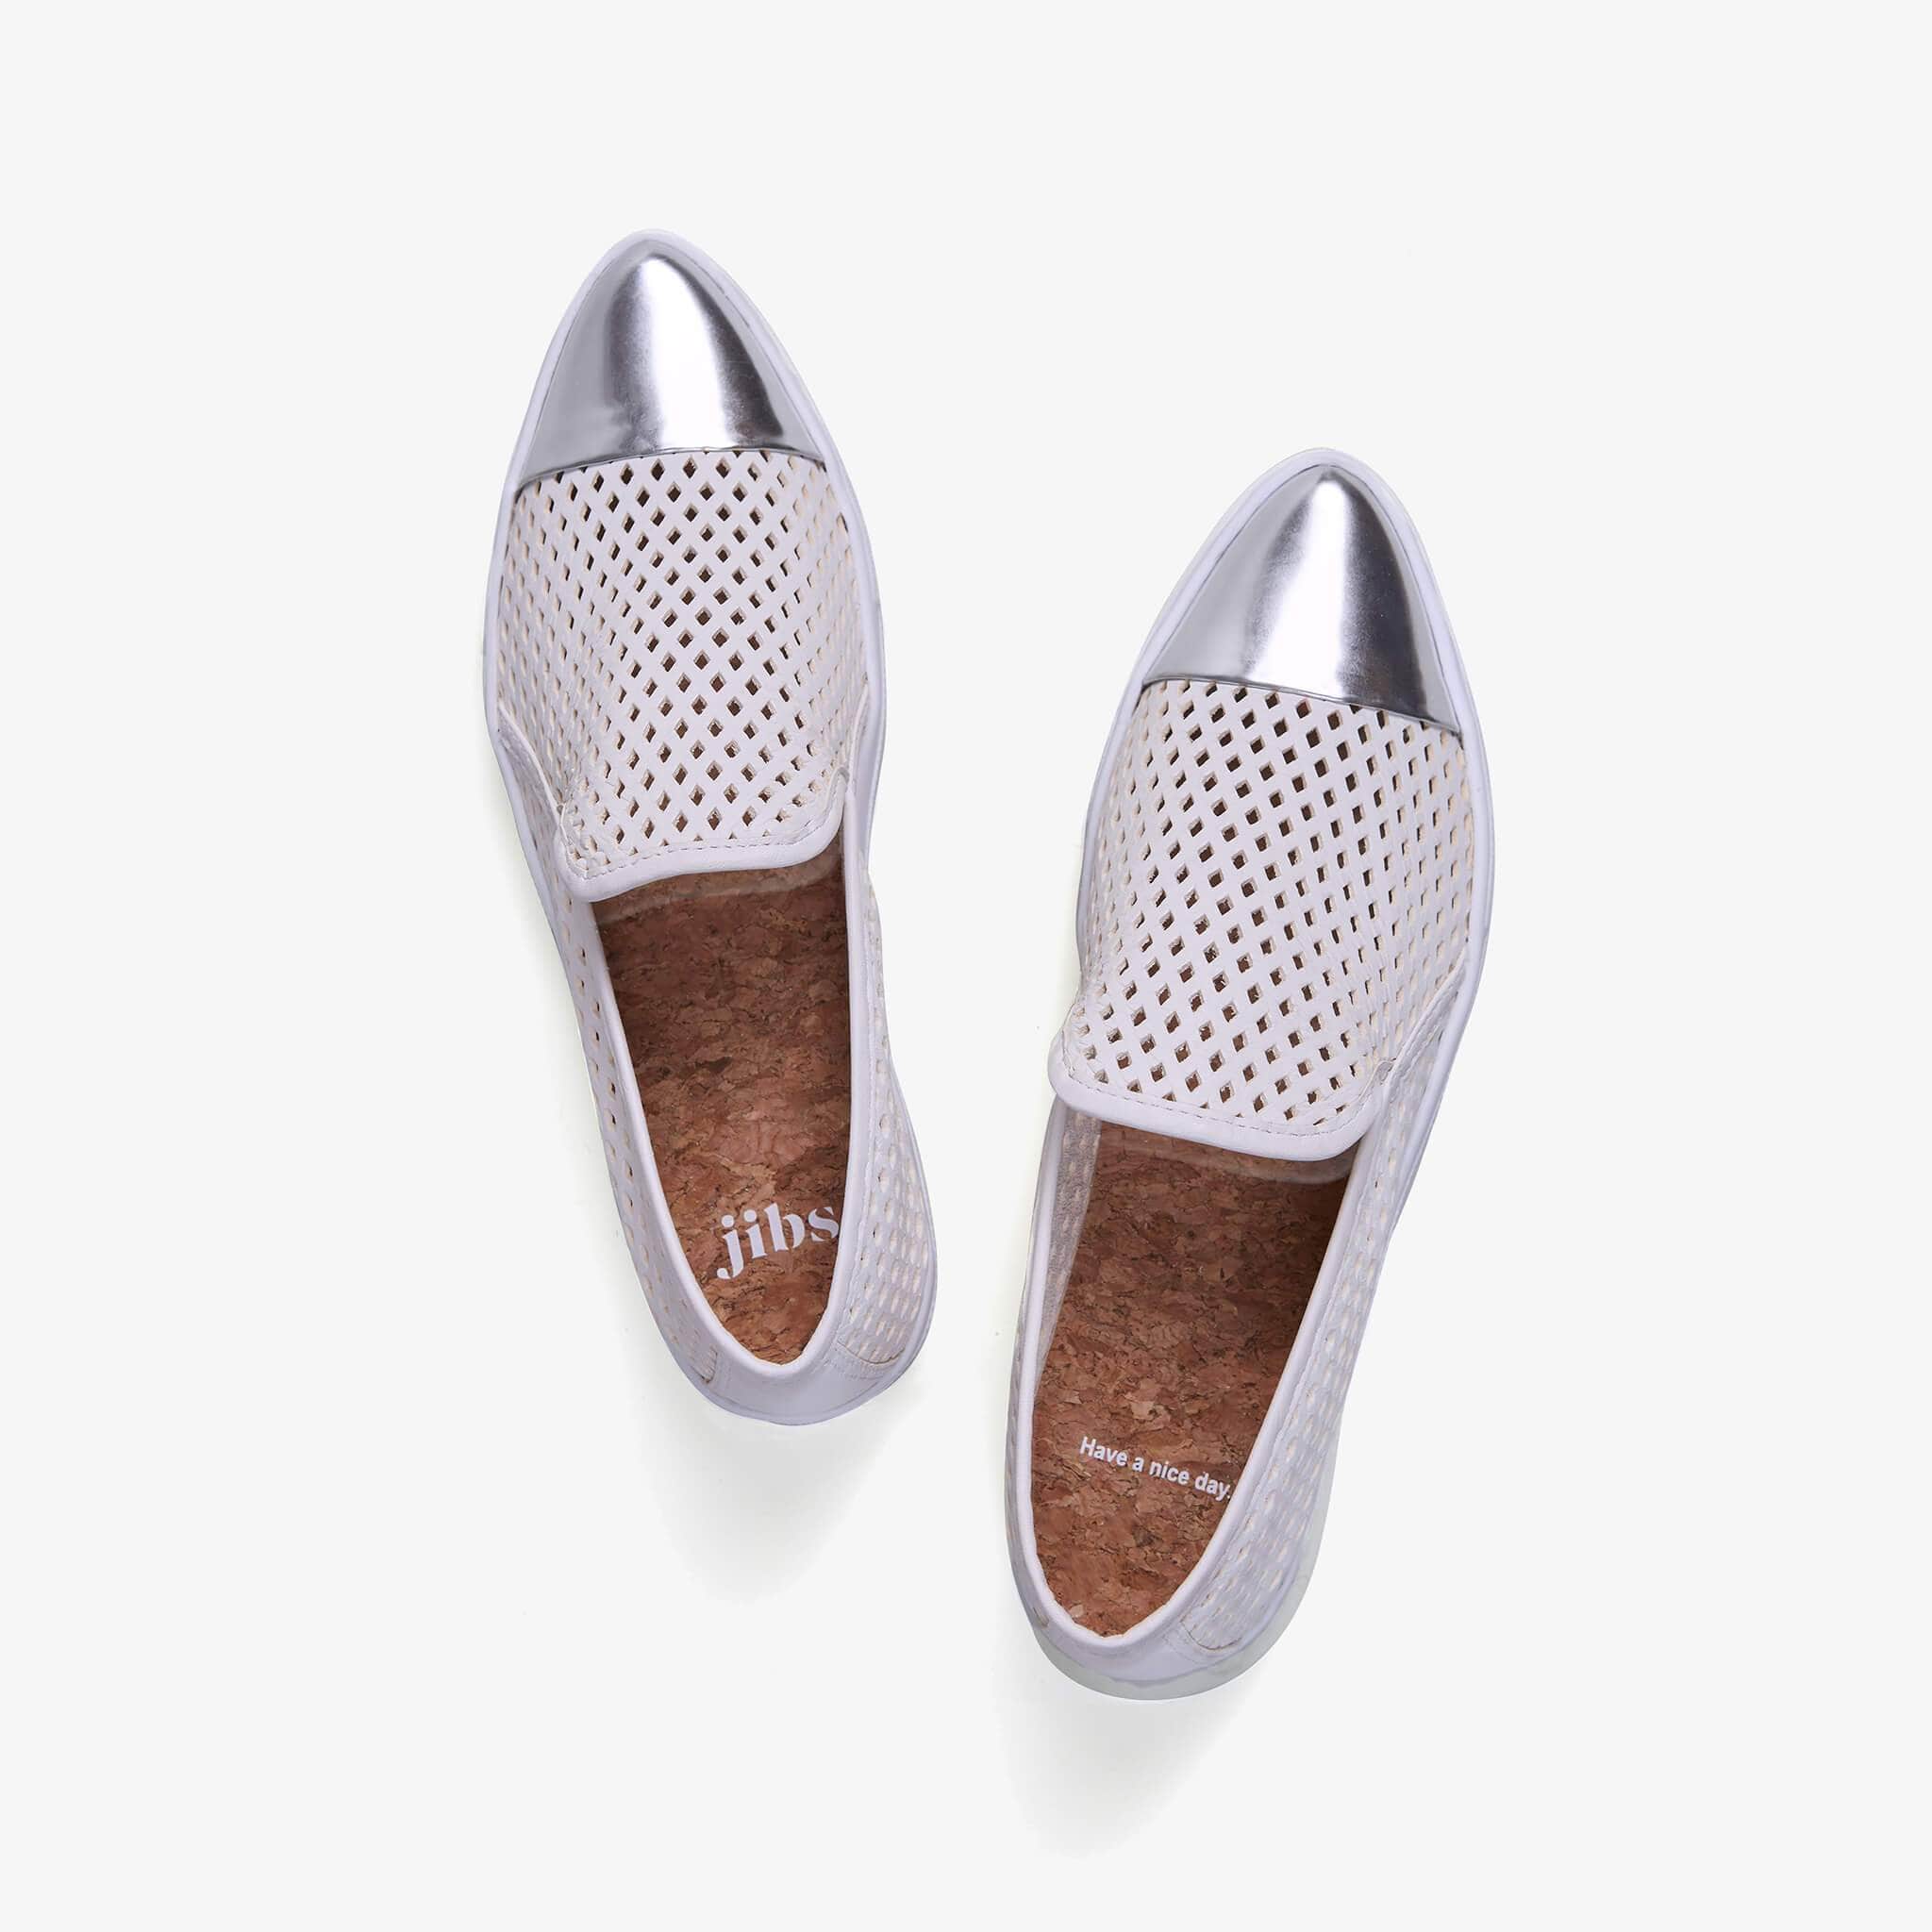 Jibs Slim White + Silver Slip On Sneaker Flat Top Have A Nice Day